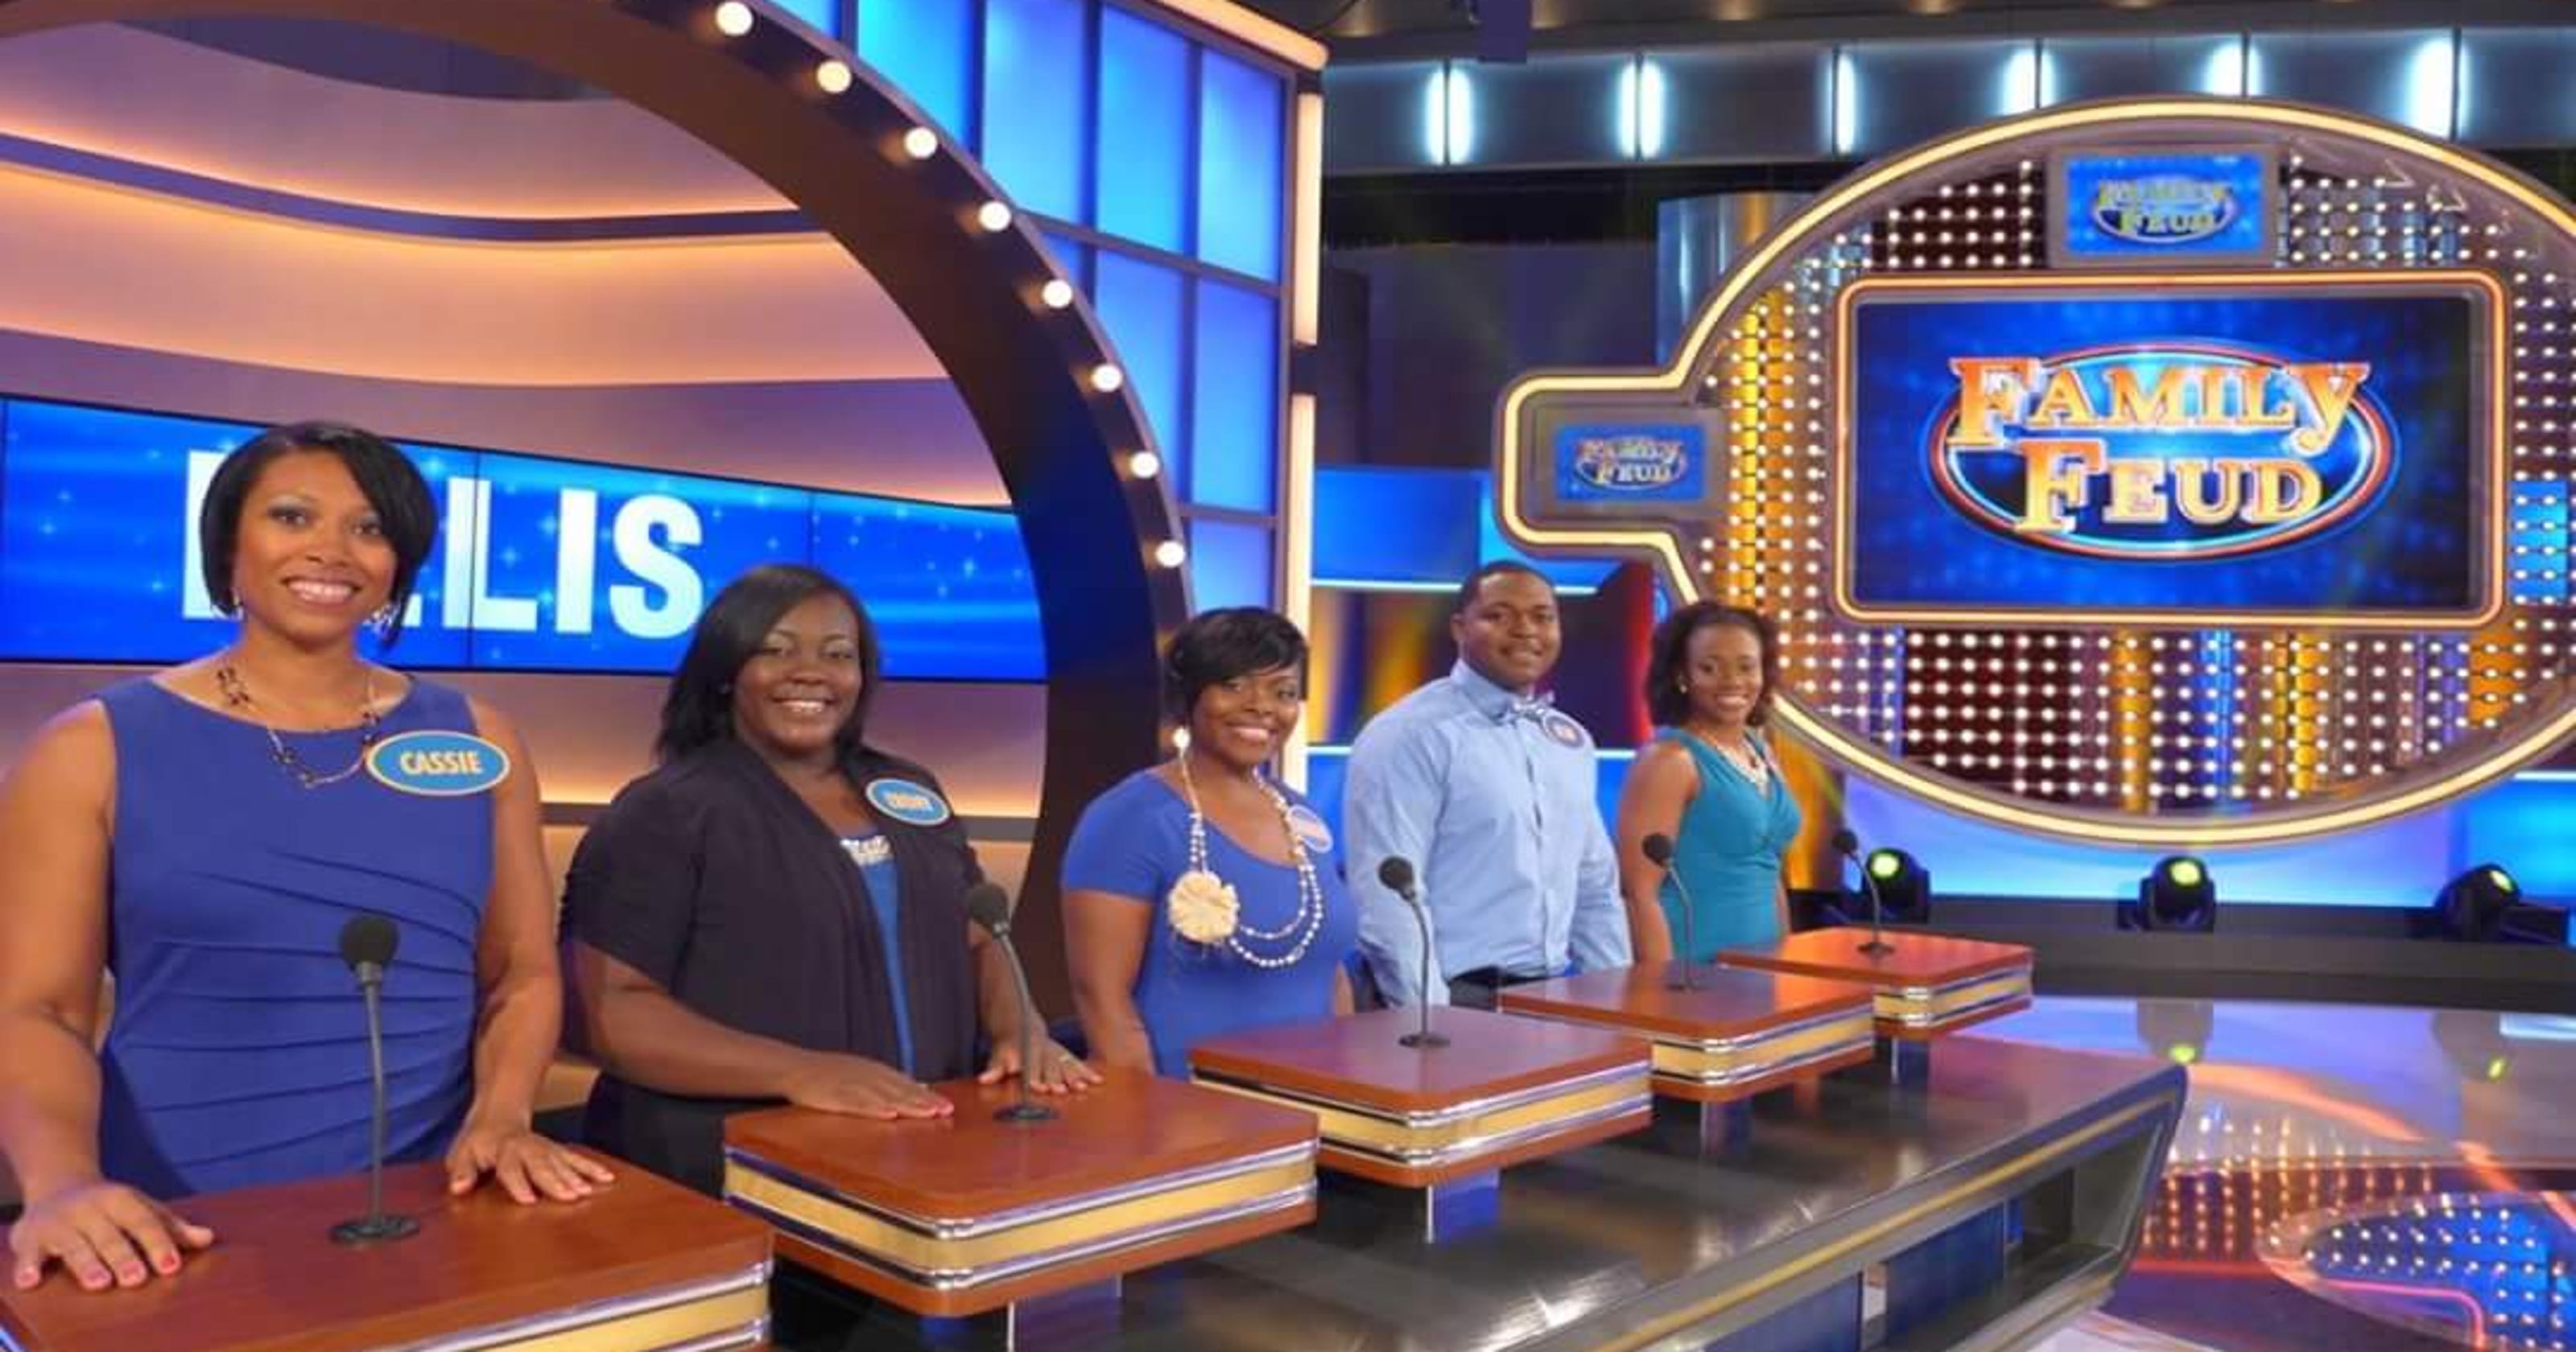 'Family Feud' features area family